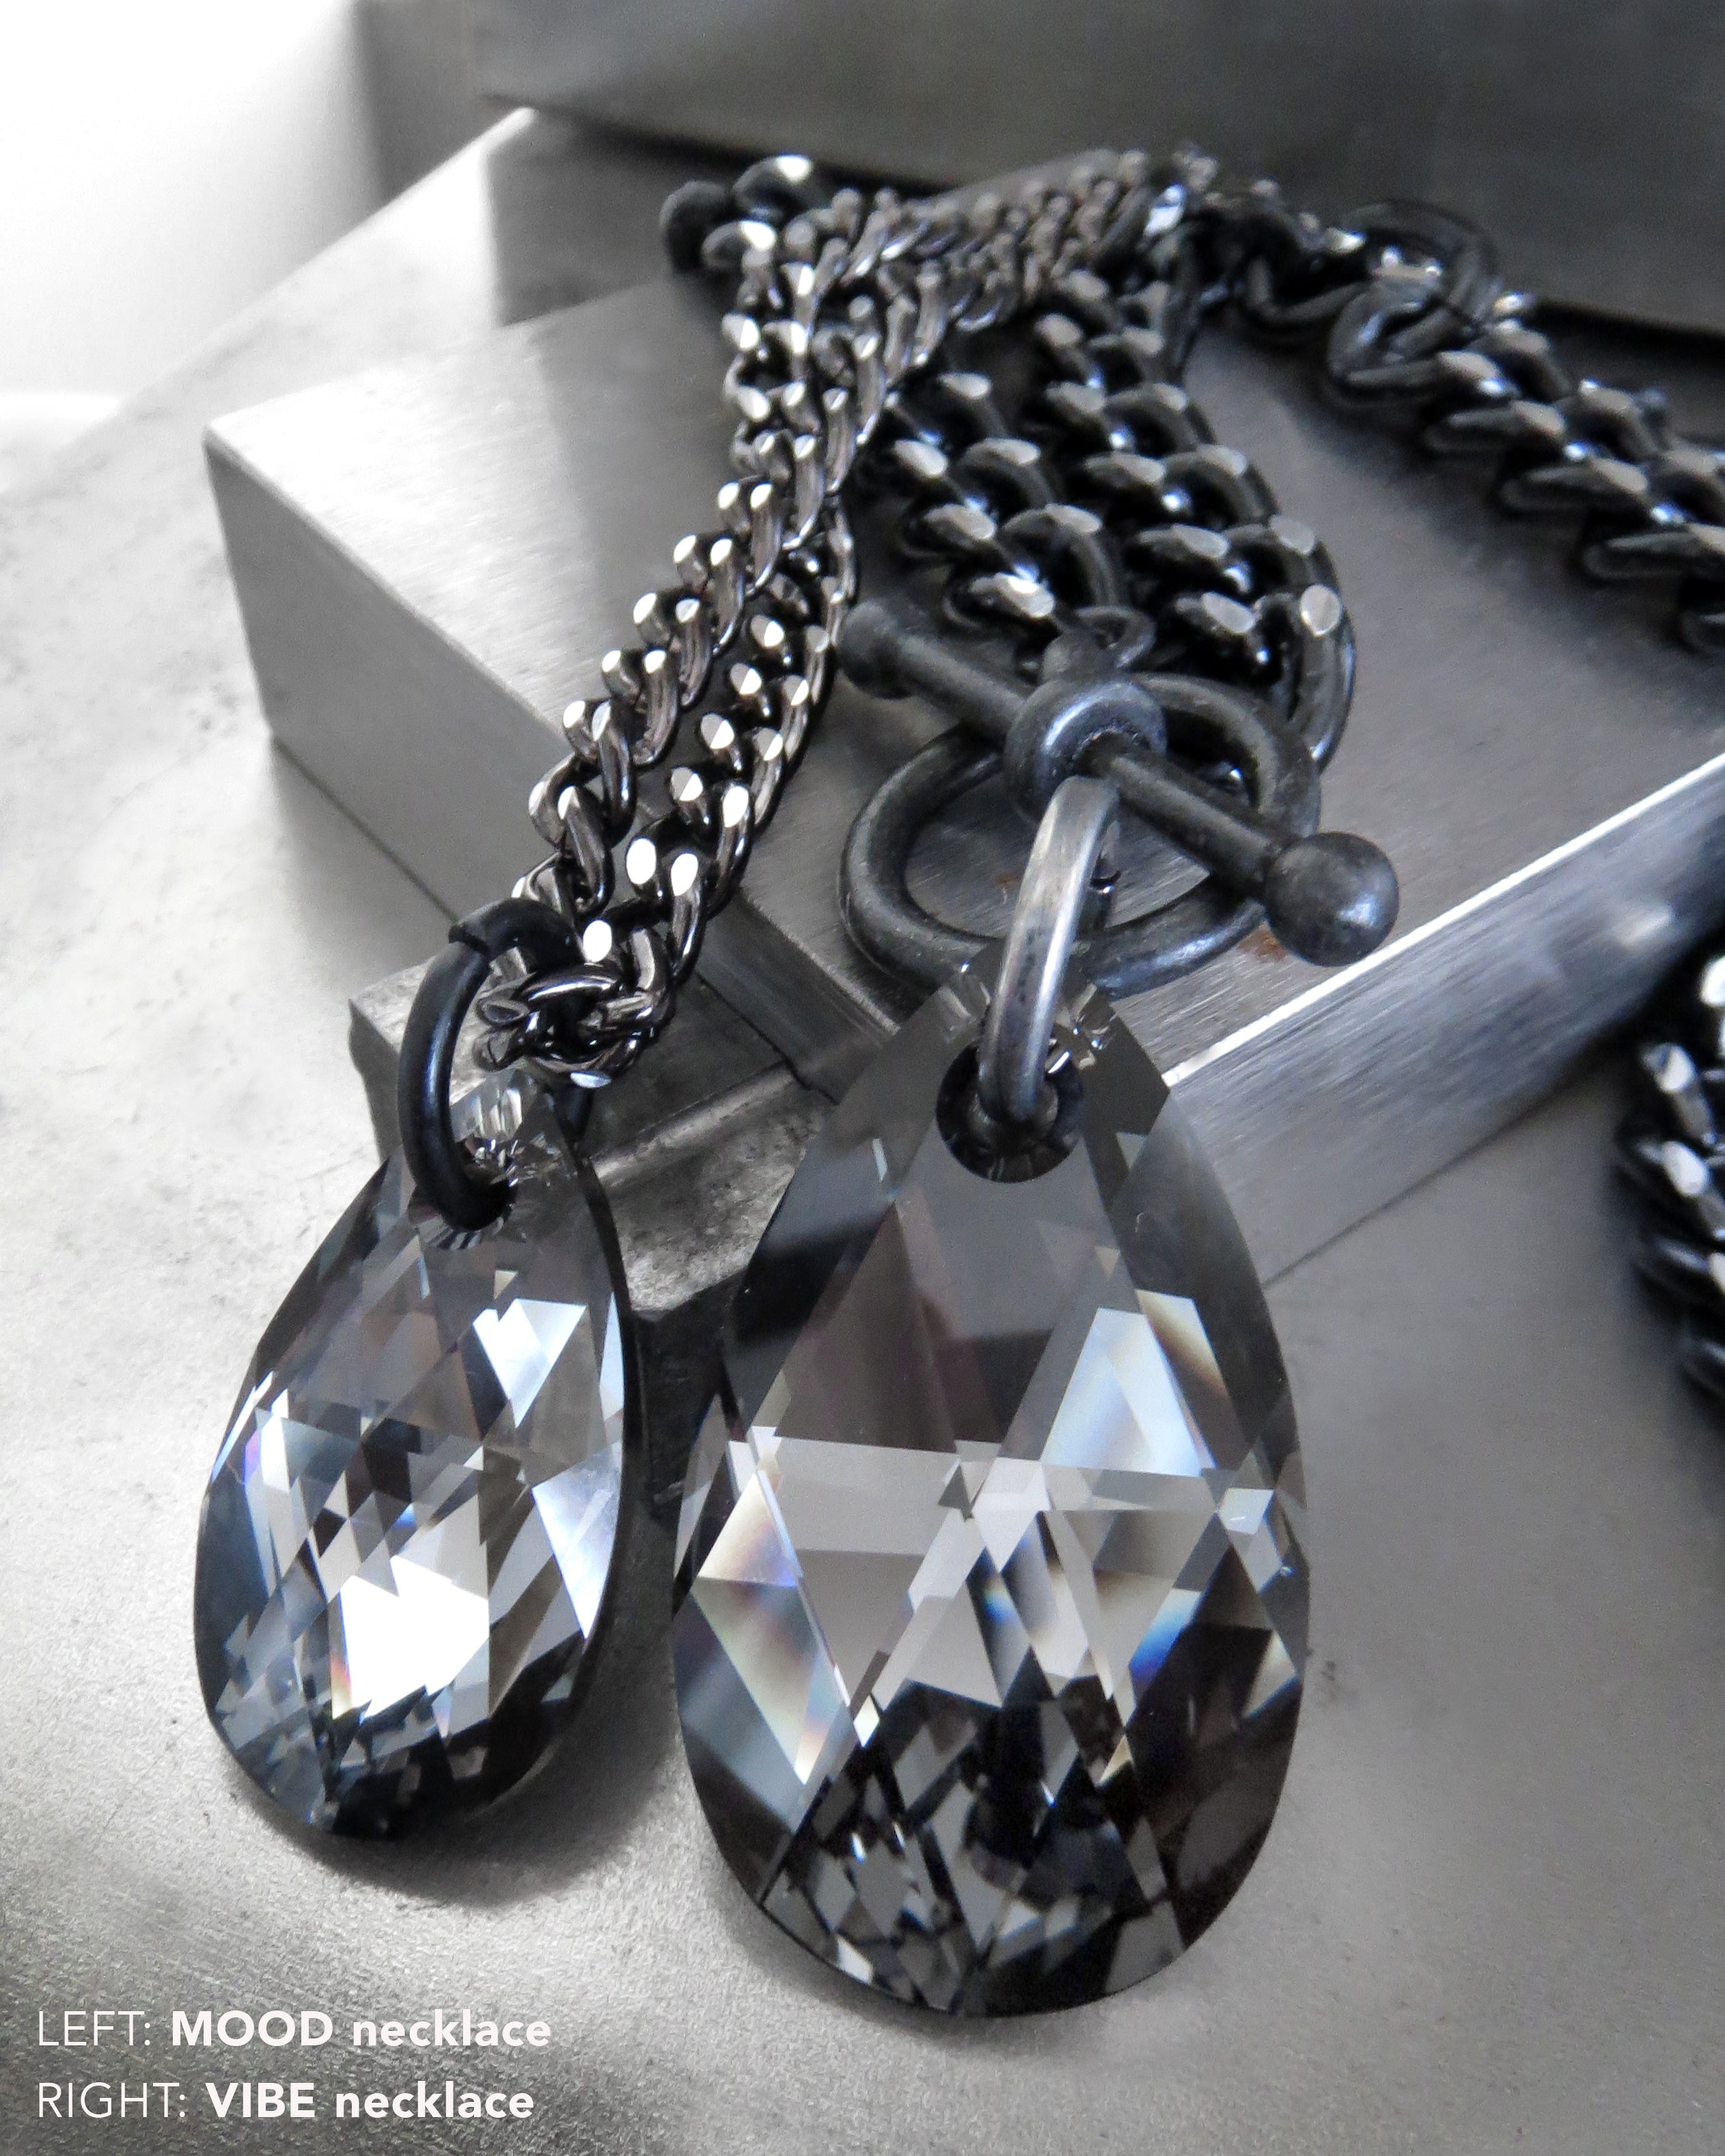 VIBE V2 - Black Teardrop Crystal Necklace with Thick Chain